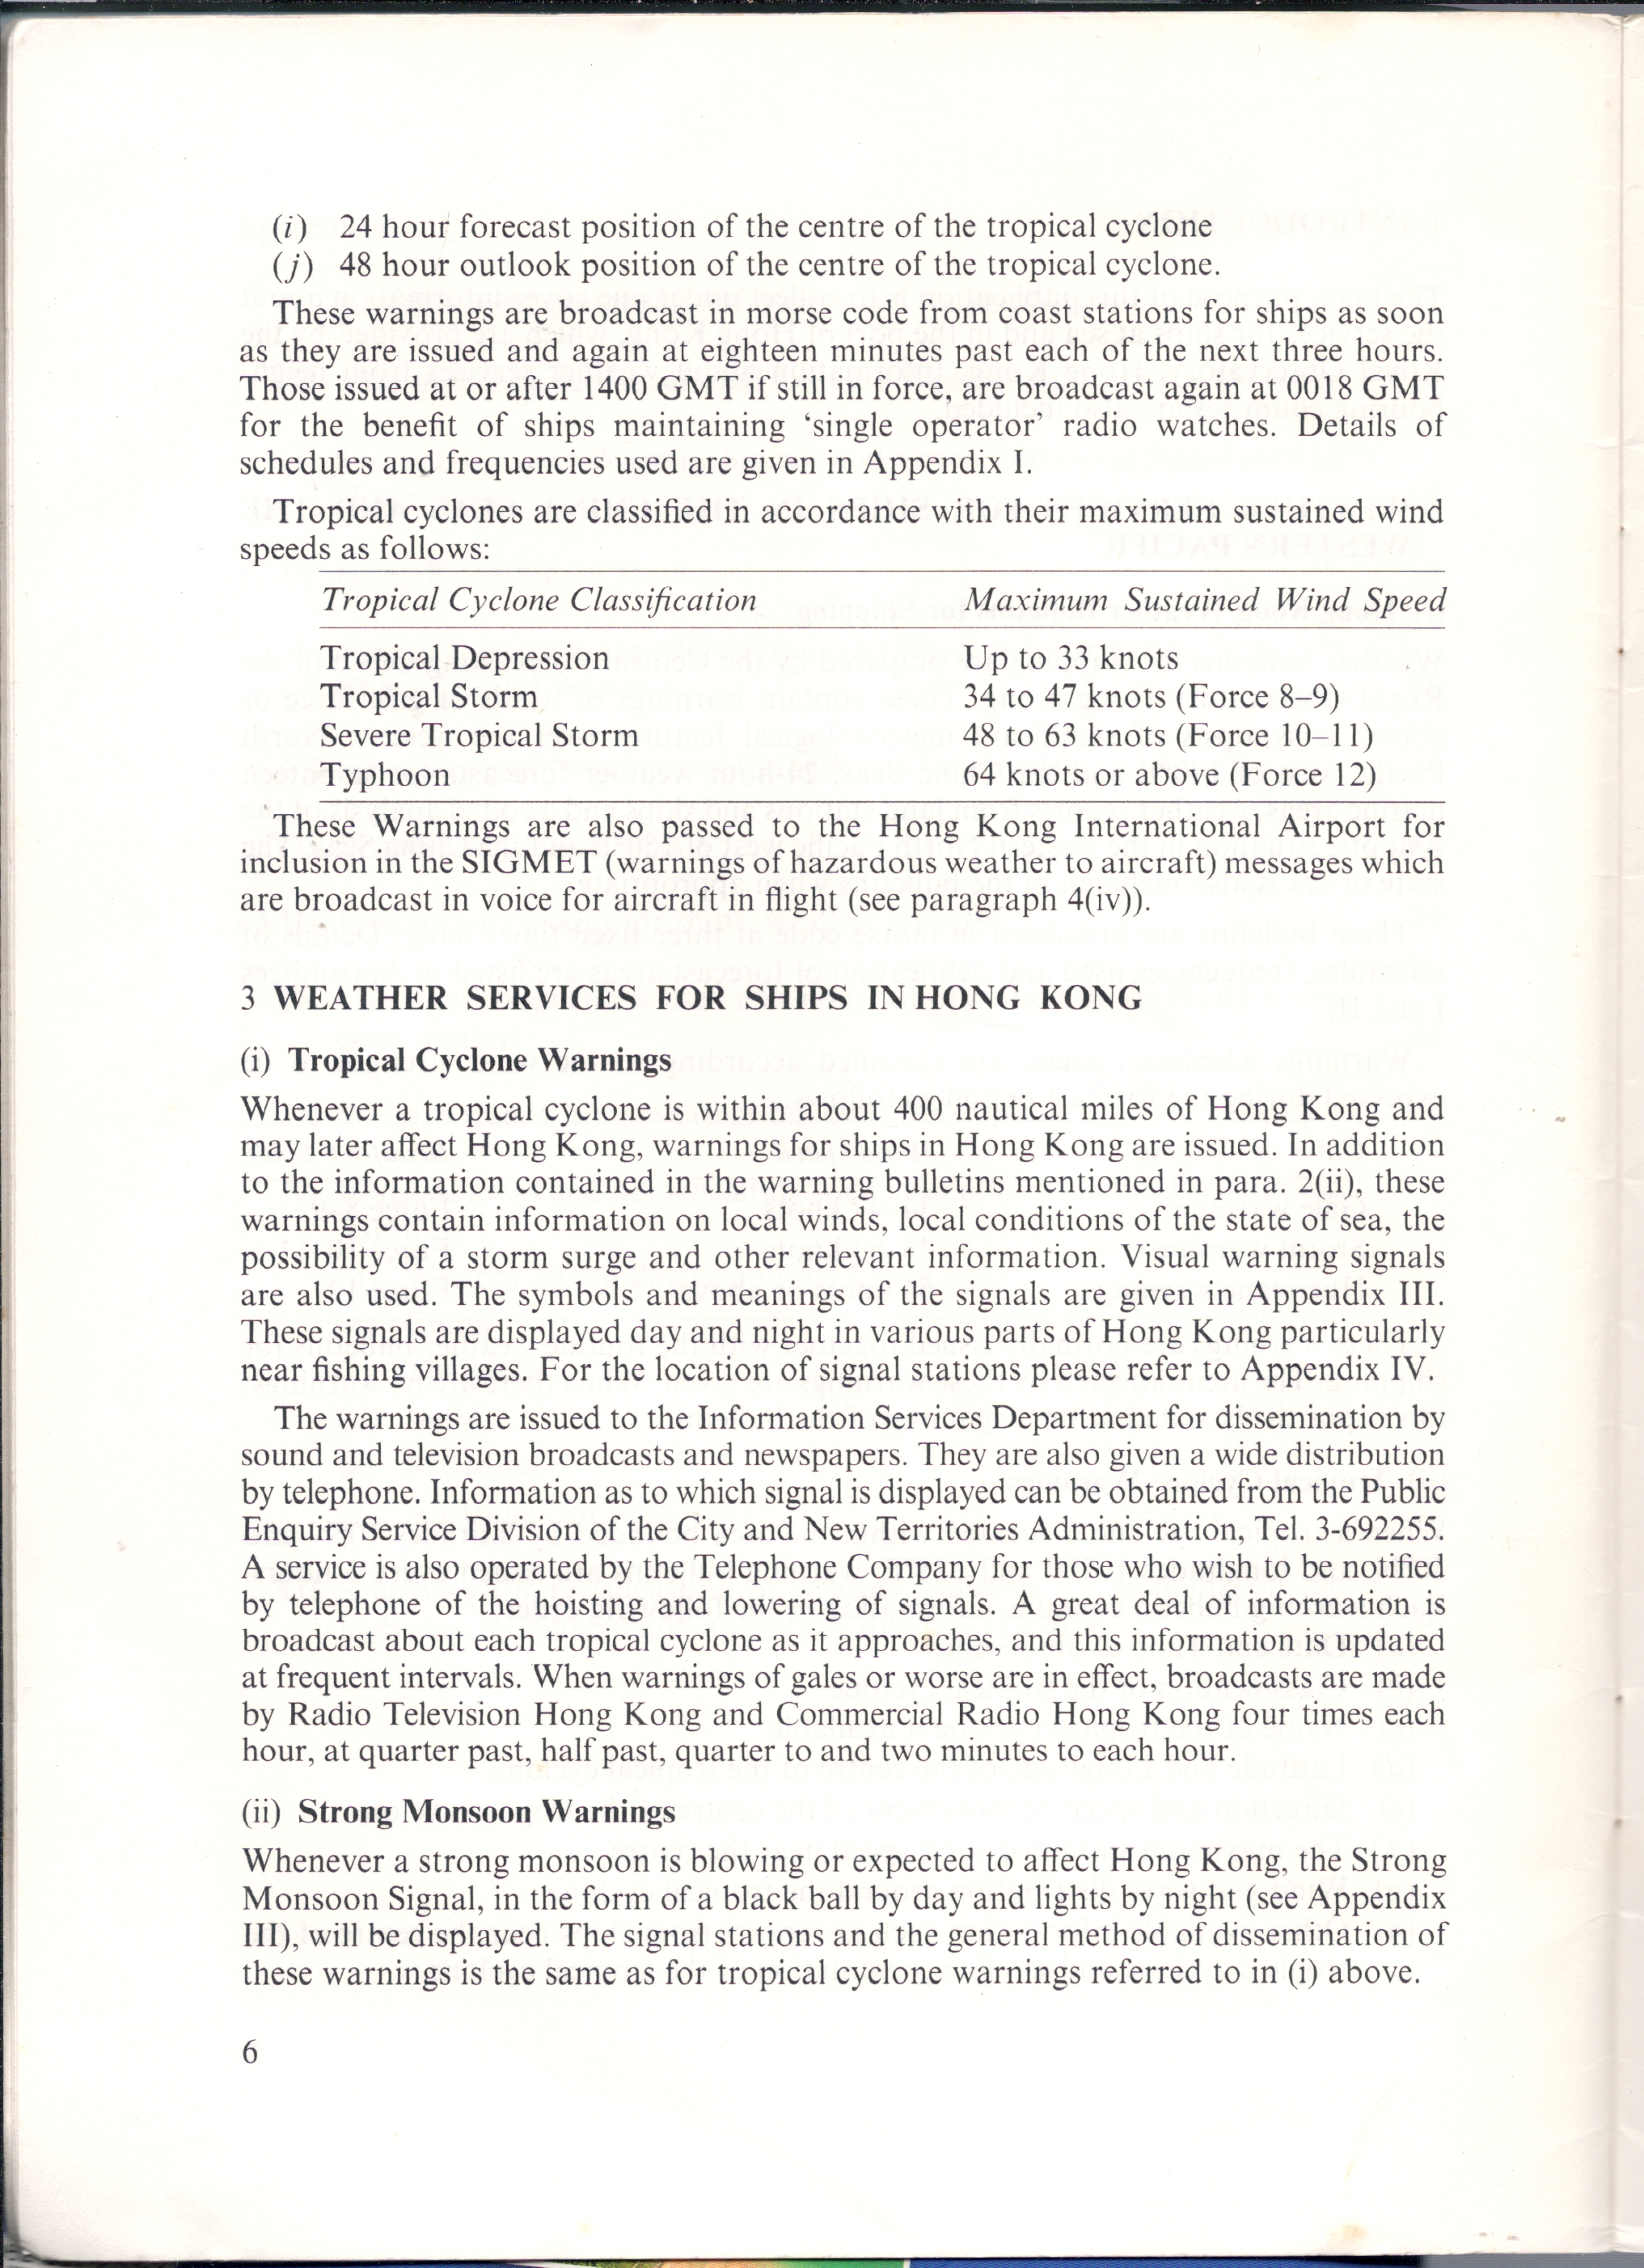 HONG KONG  WEATHER SERVICES FOR SHIPPING 1984 - 06.JPG